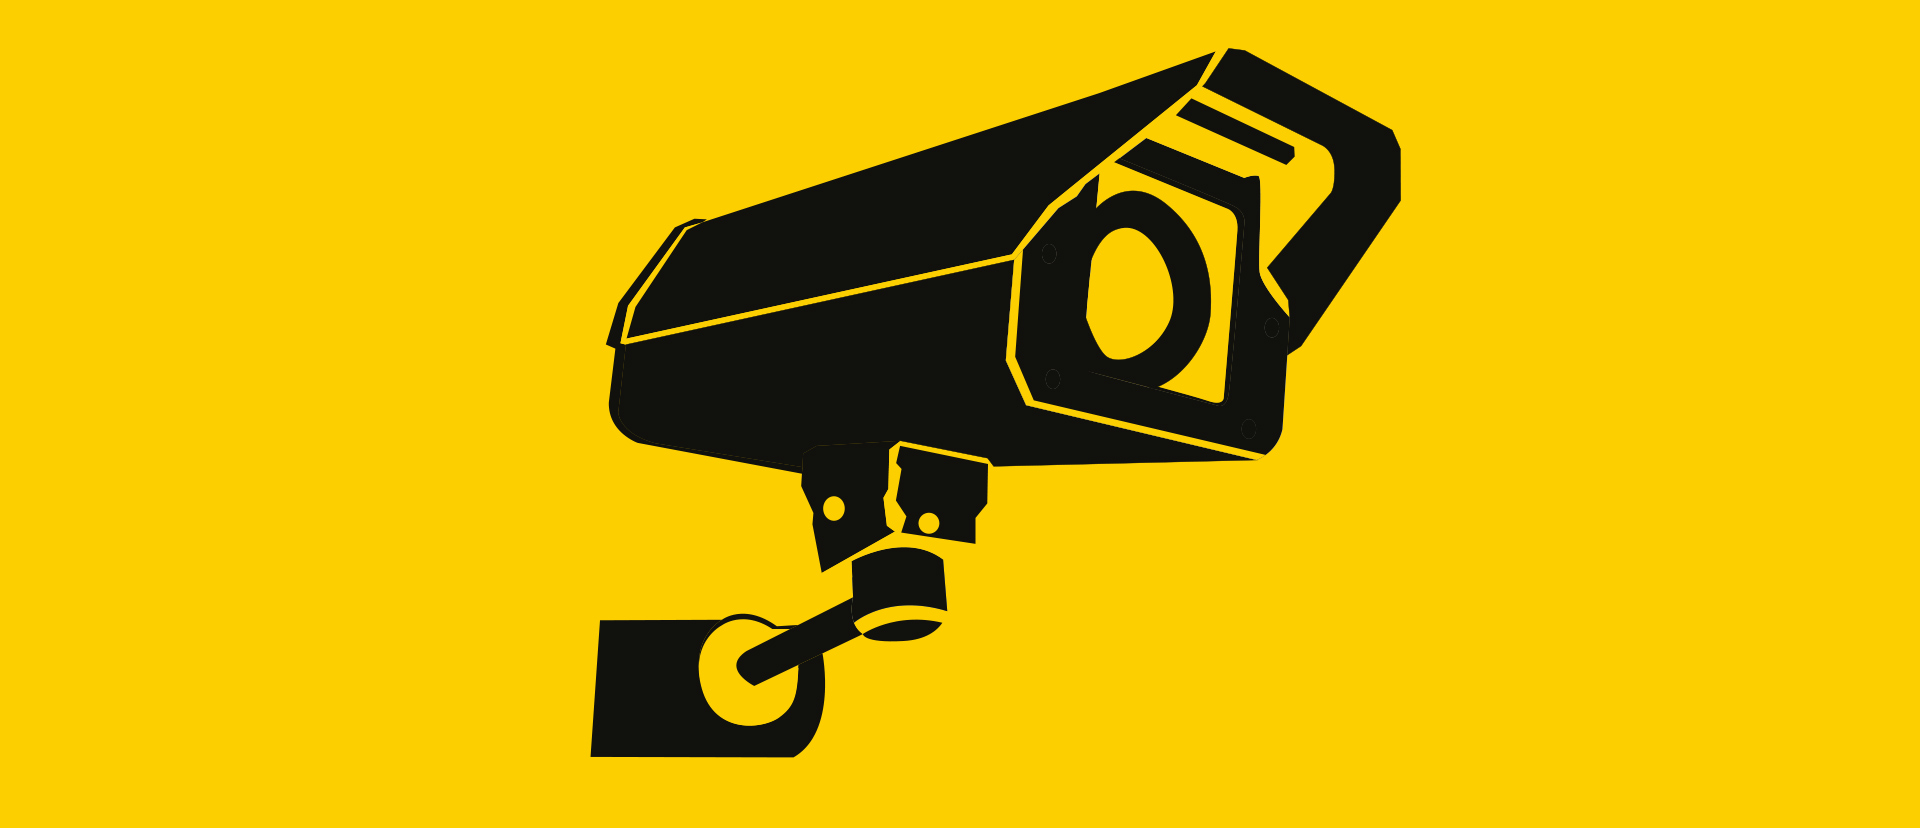 Government Surveillance And Privacy In The Digital Age